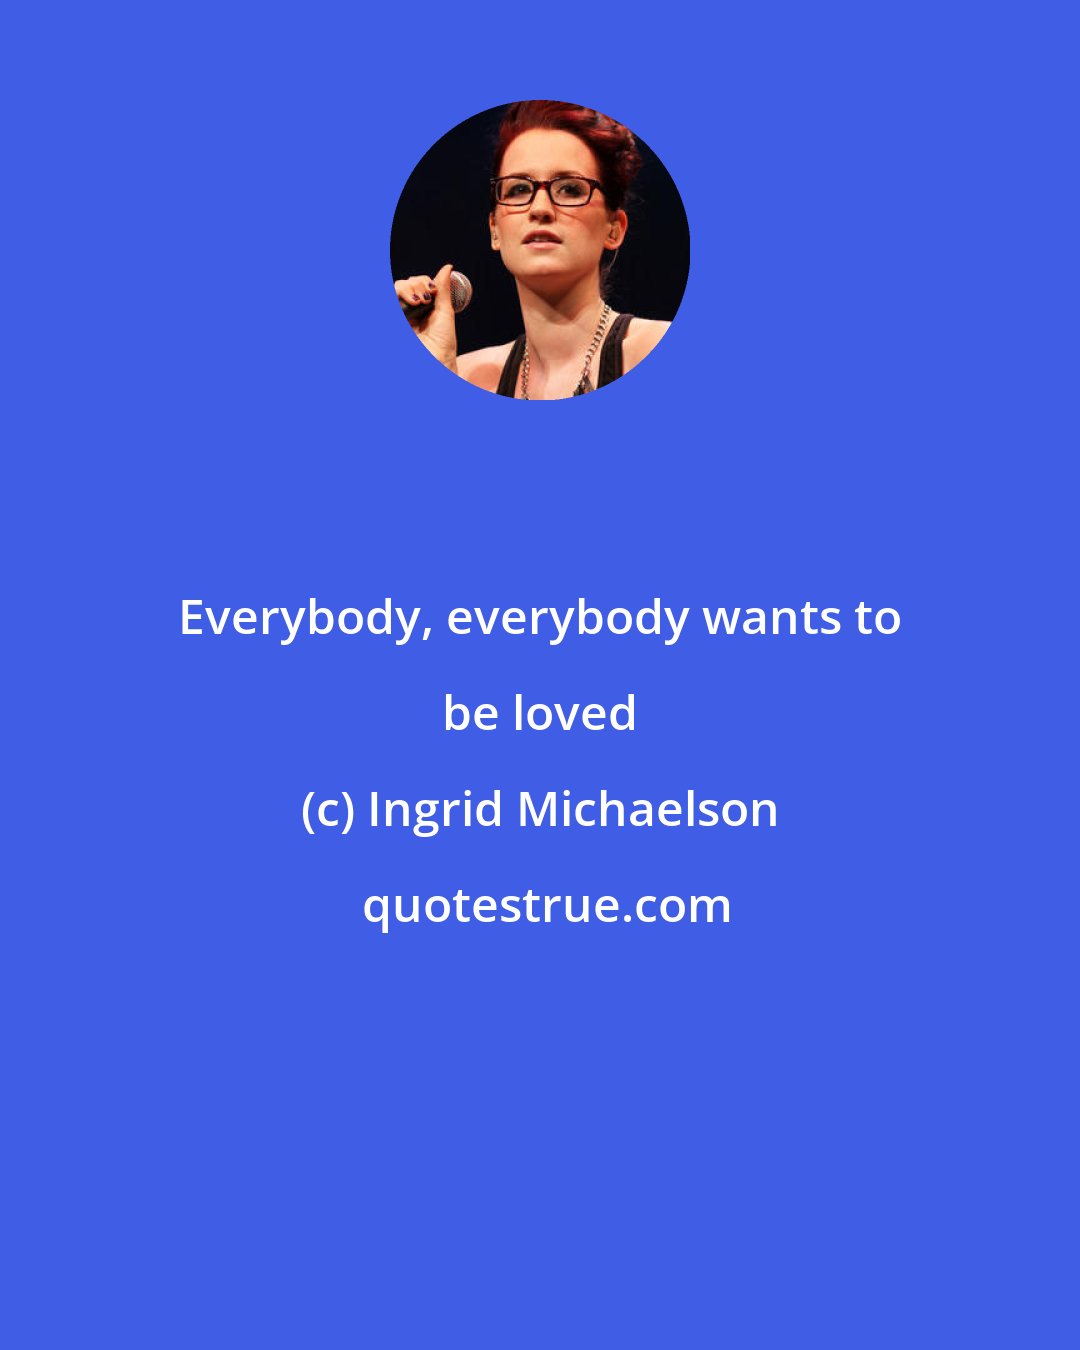 Ingrid Michaelson: Everybody, everybody wants to be loved